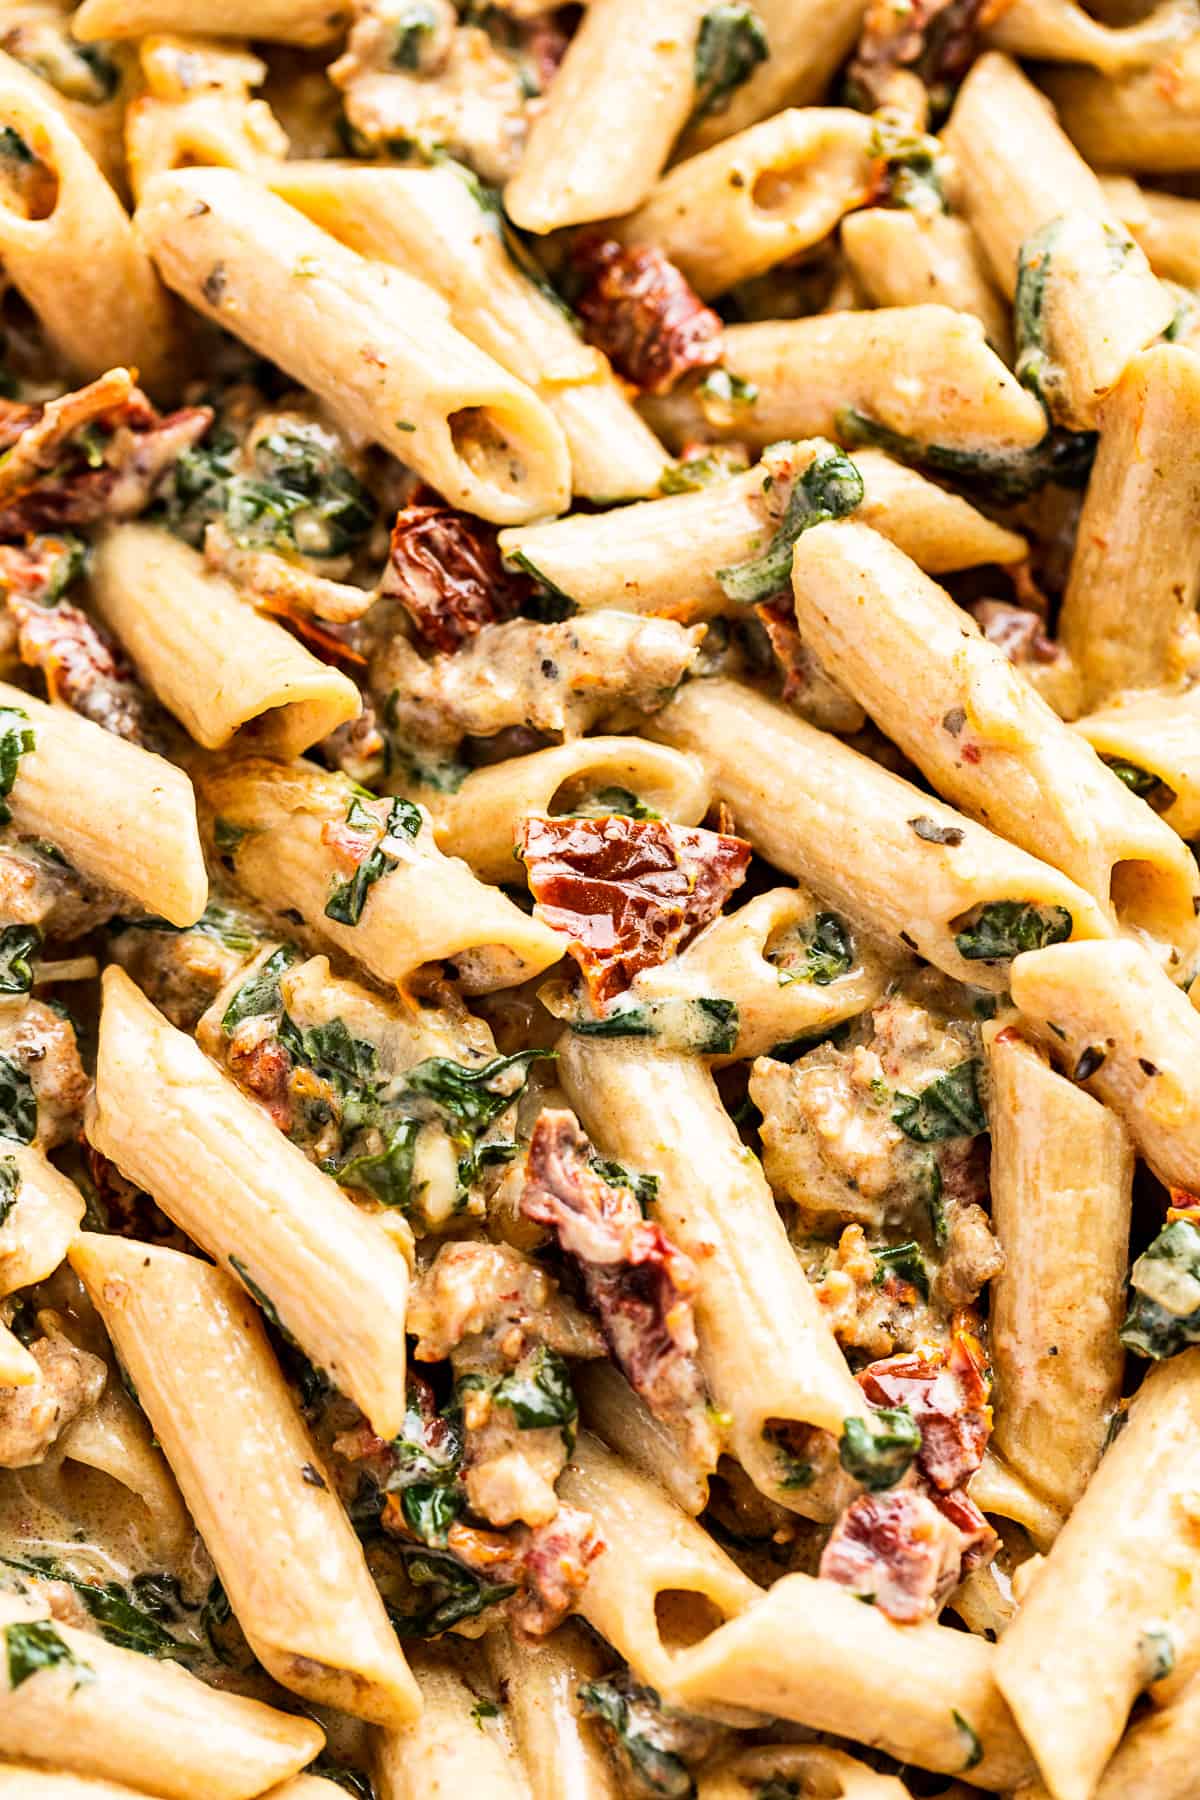 Close up view of the Tuscan Pasta made with penne instead of fettucine.